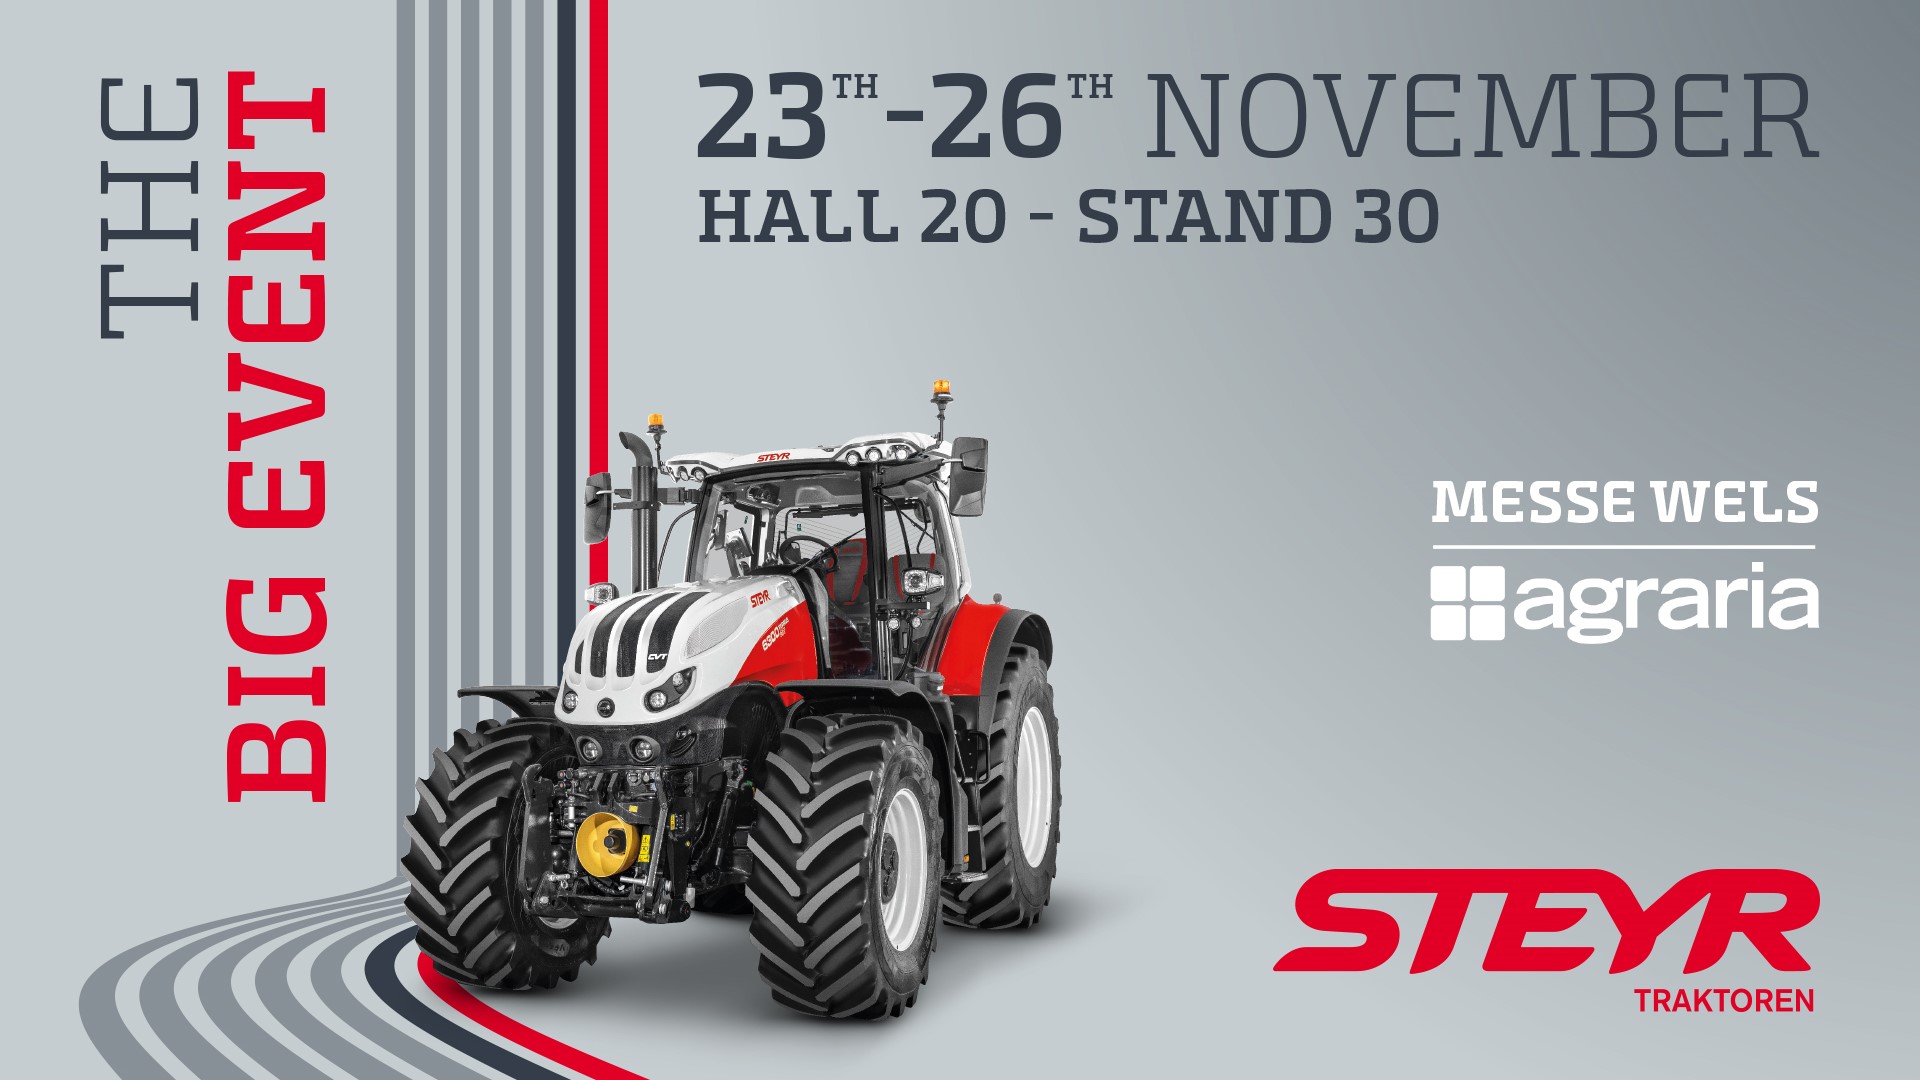 STEYR® SET TO SHOW LATEST TRACTOR AND TECHNOLOGY DEVELOPMENTS AT AGRARIA  2022